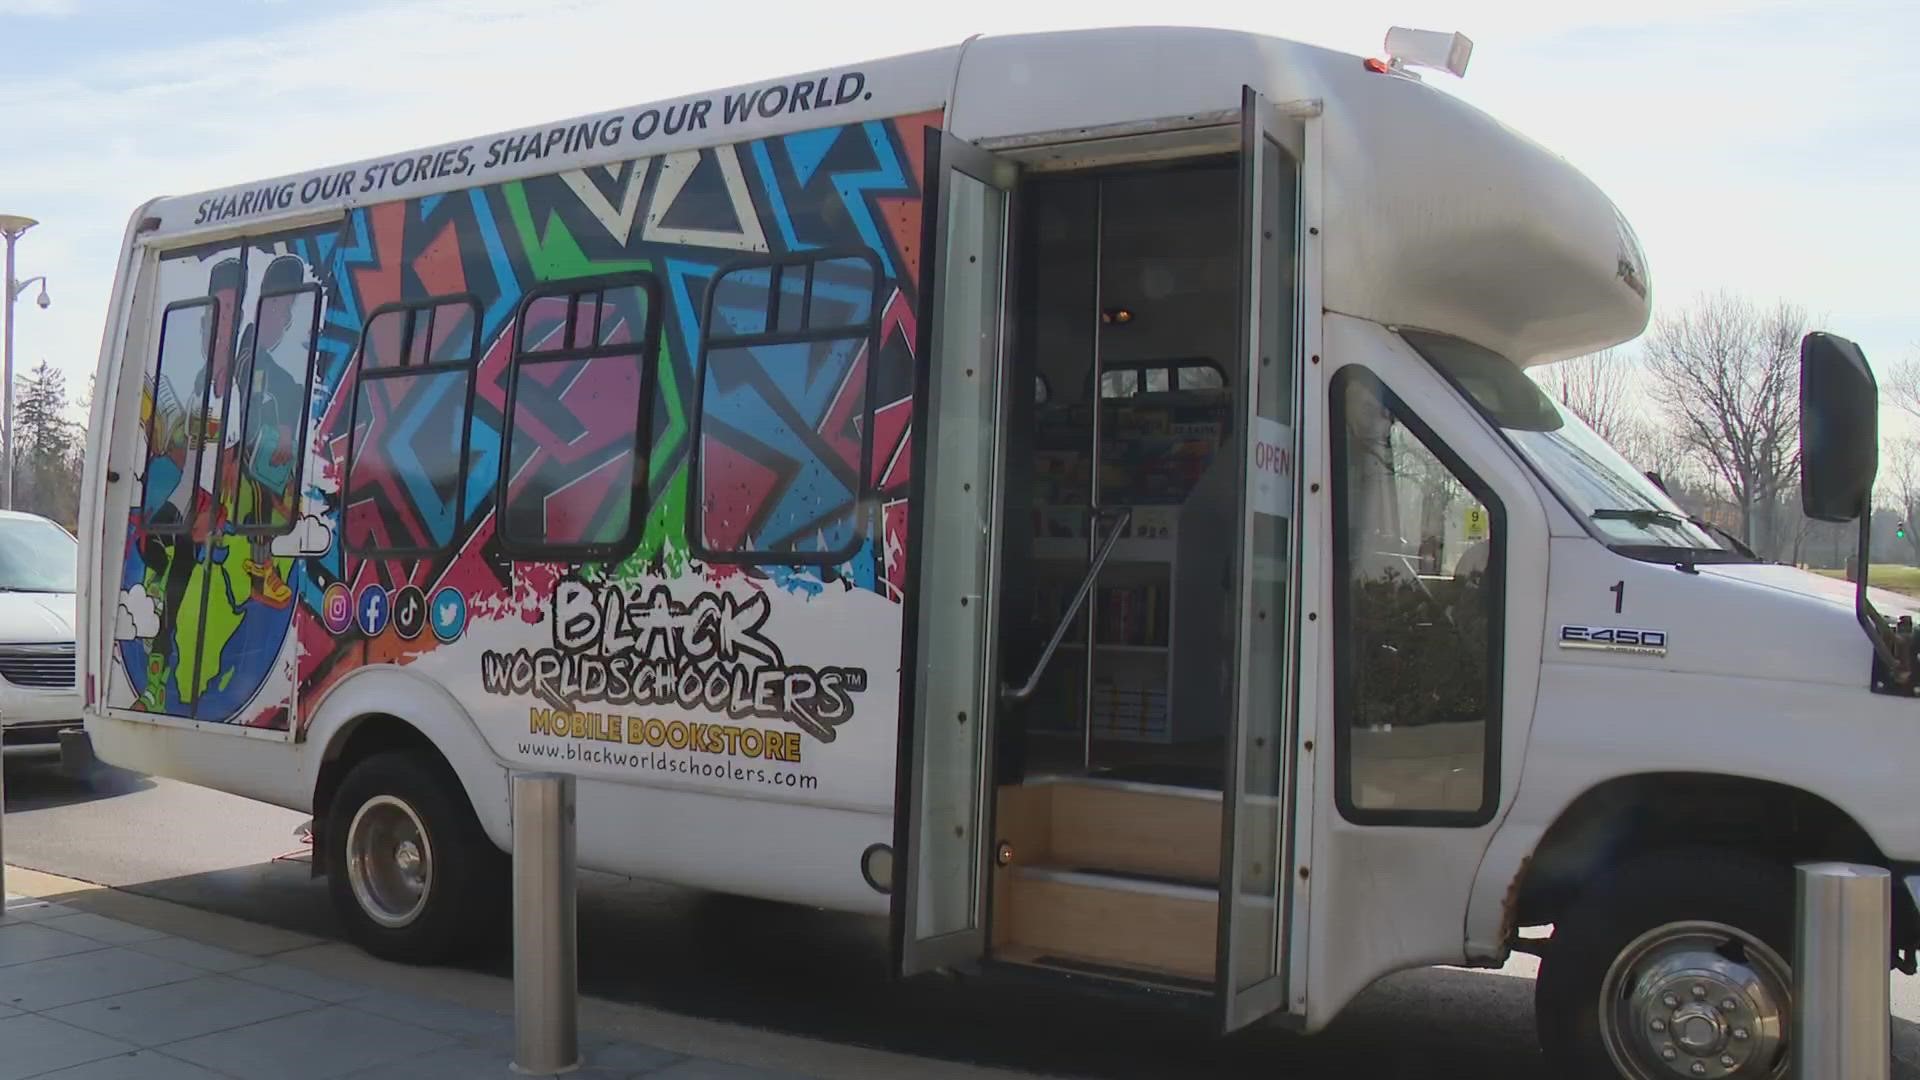 It's a one-of-a-kind bookstore on wheels here in Indy.